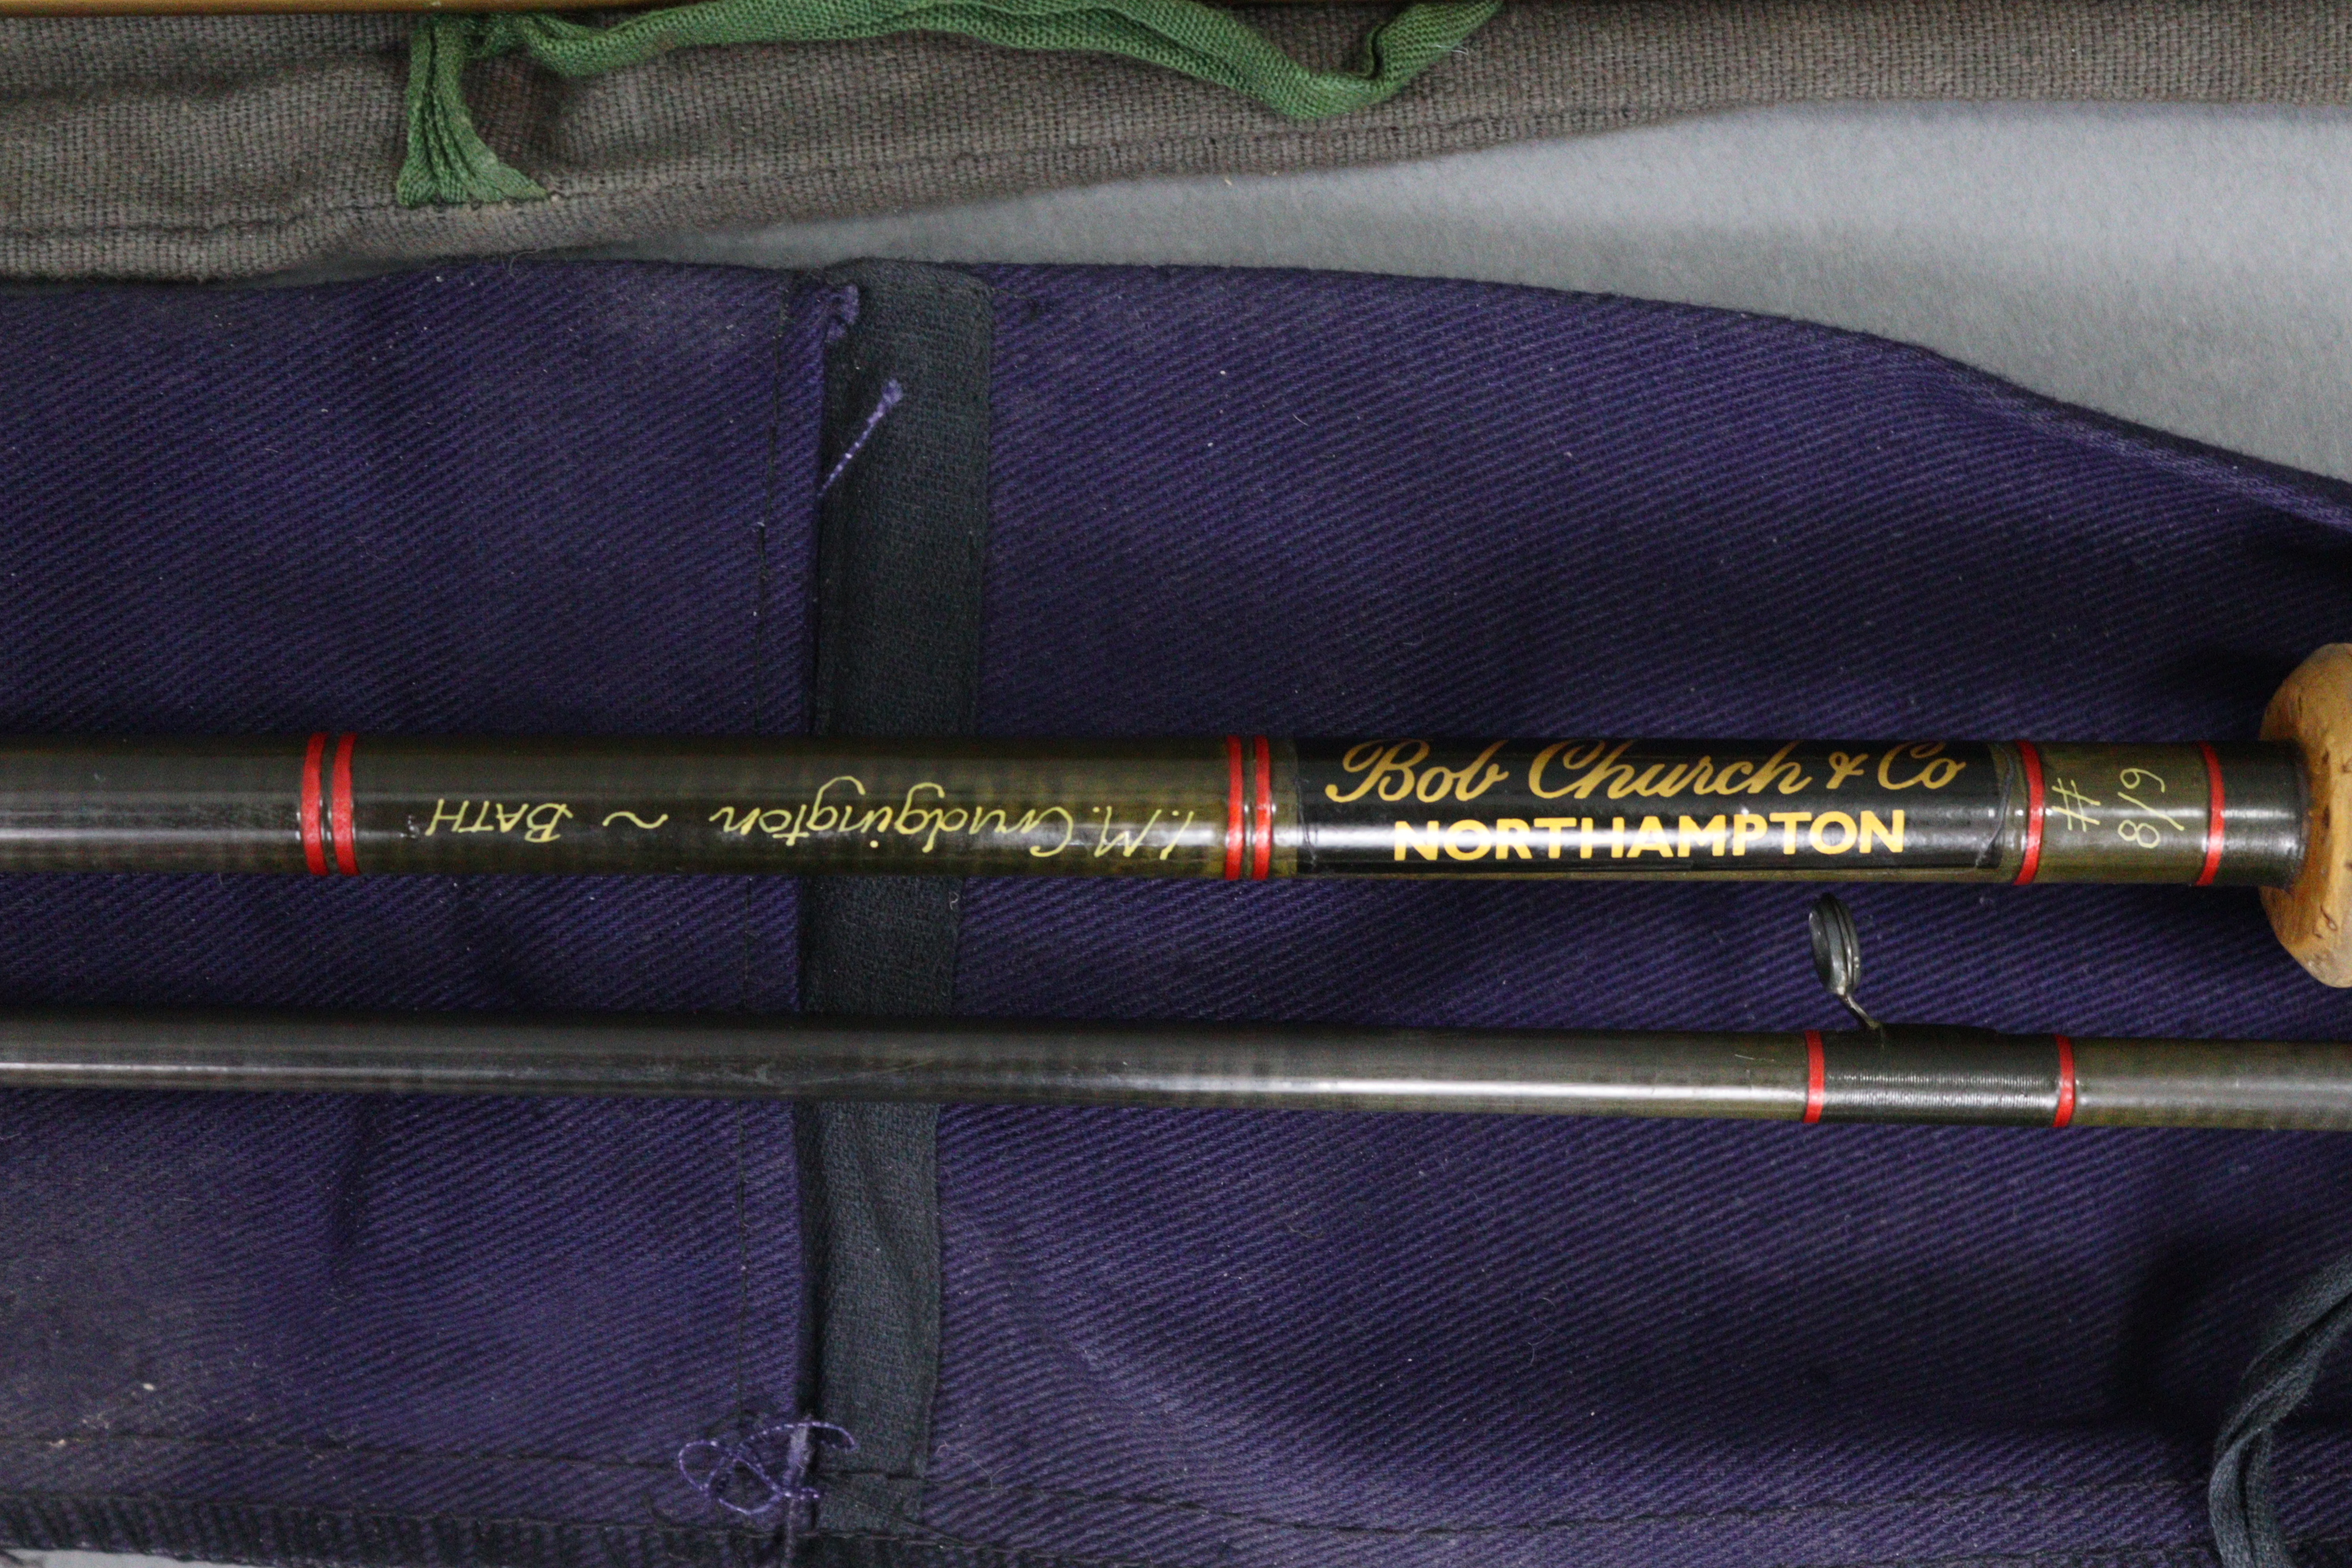 A Bob Church & Co. of Northampton 9’11” two-piece carbon #8/9 fly fishing rod; & another two-piece - Image 4 of 6